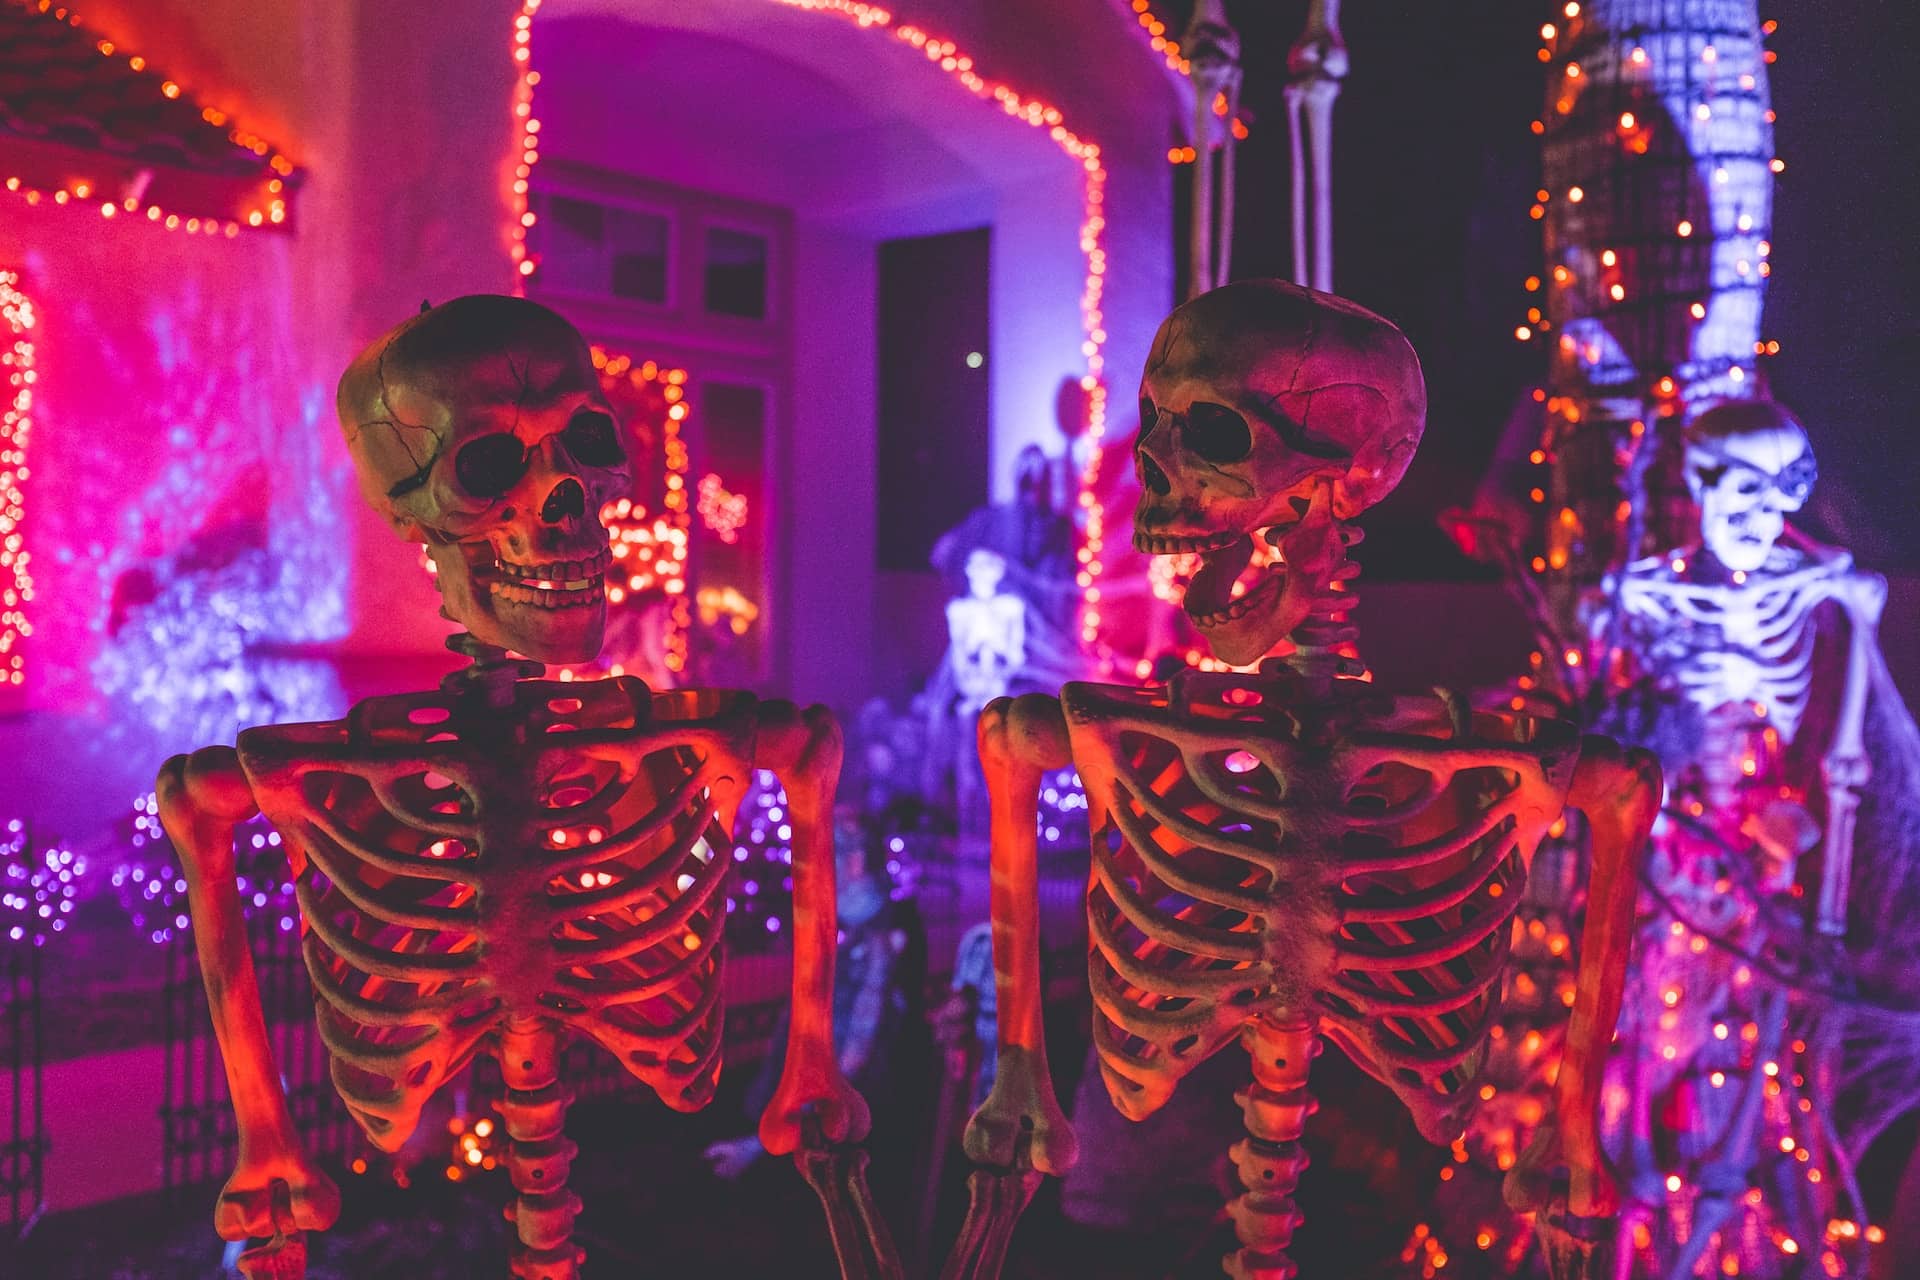 Two skeletons in front of a house decorated for Halloween